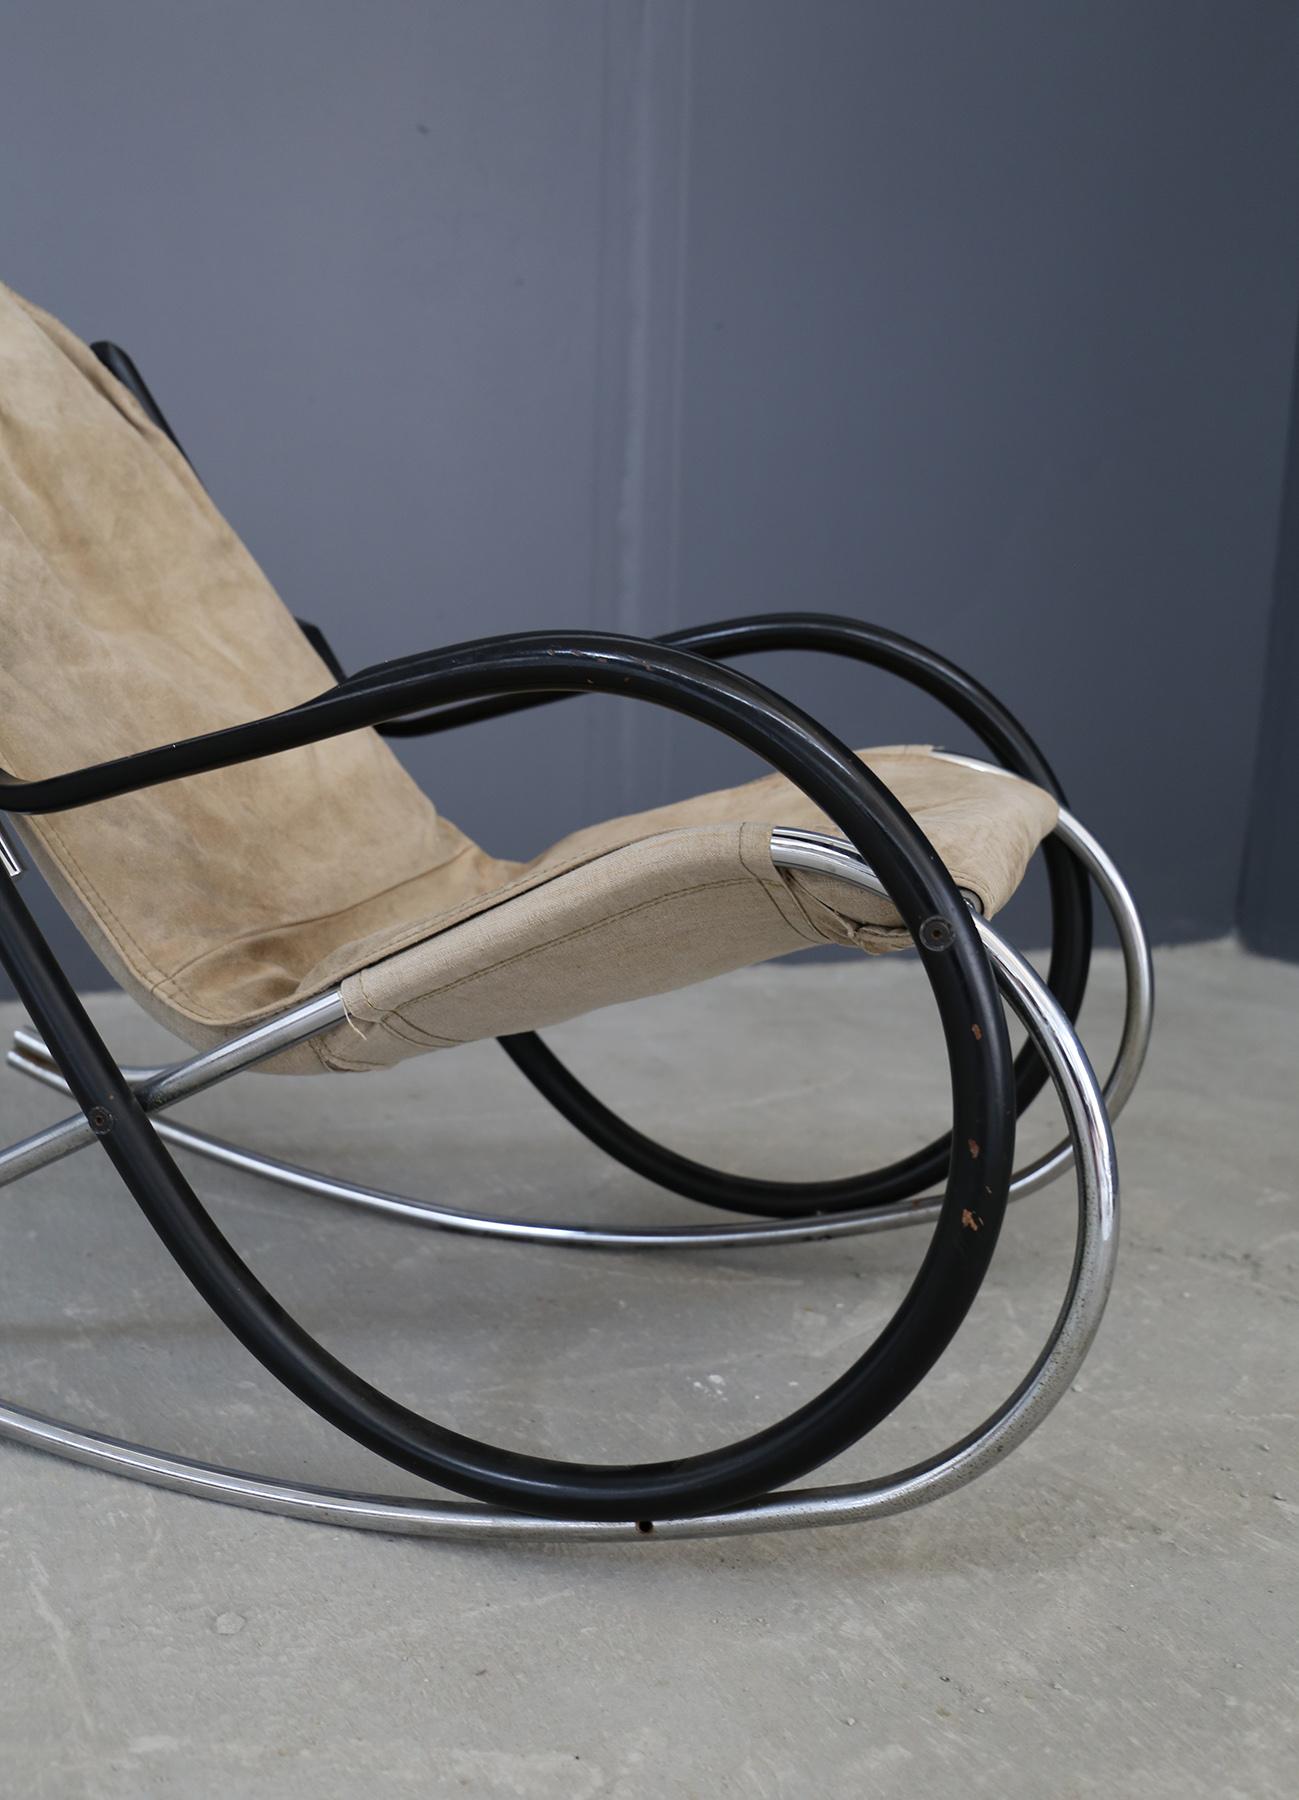 Comfortable Nonna rocking chair designed by Paul Tuttle for Strassle international, Switzerland 1972. This example is very nice with the tubular chrome rocking frame and the sides in black lacquered curved wood. Seat in buckskin canvas in very good